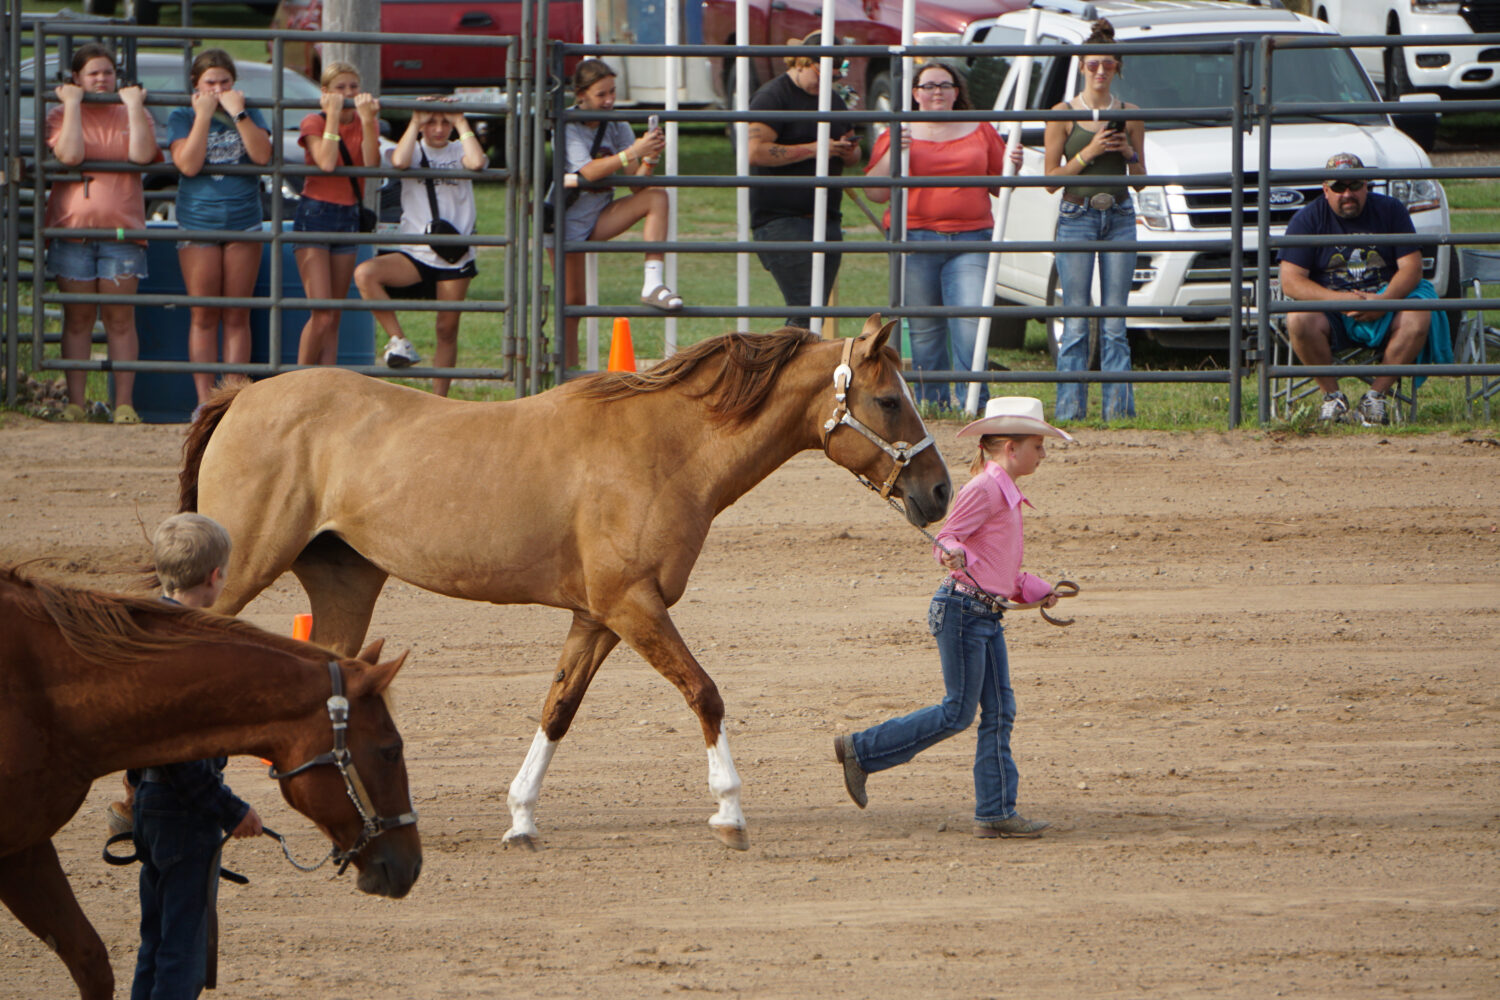 4-H Horse Show provides Grand Stand entertainment